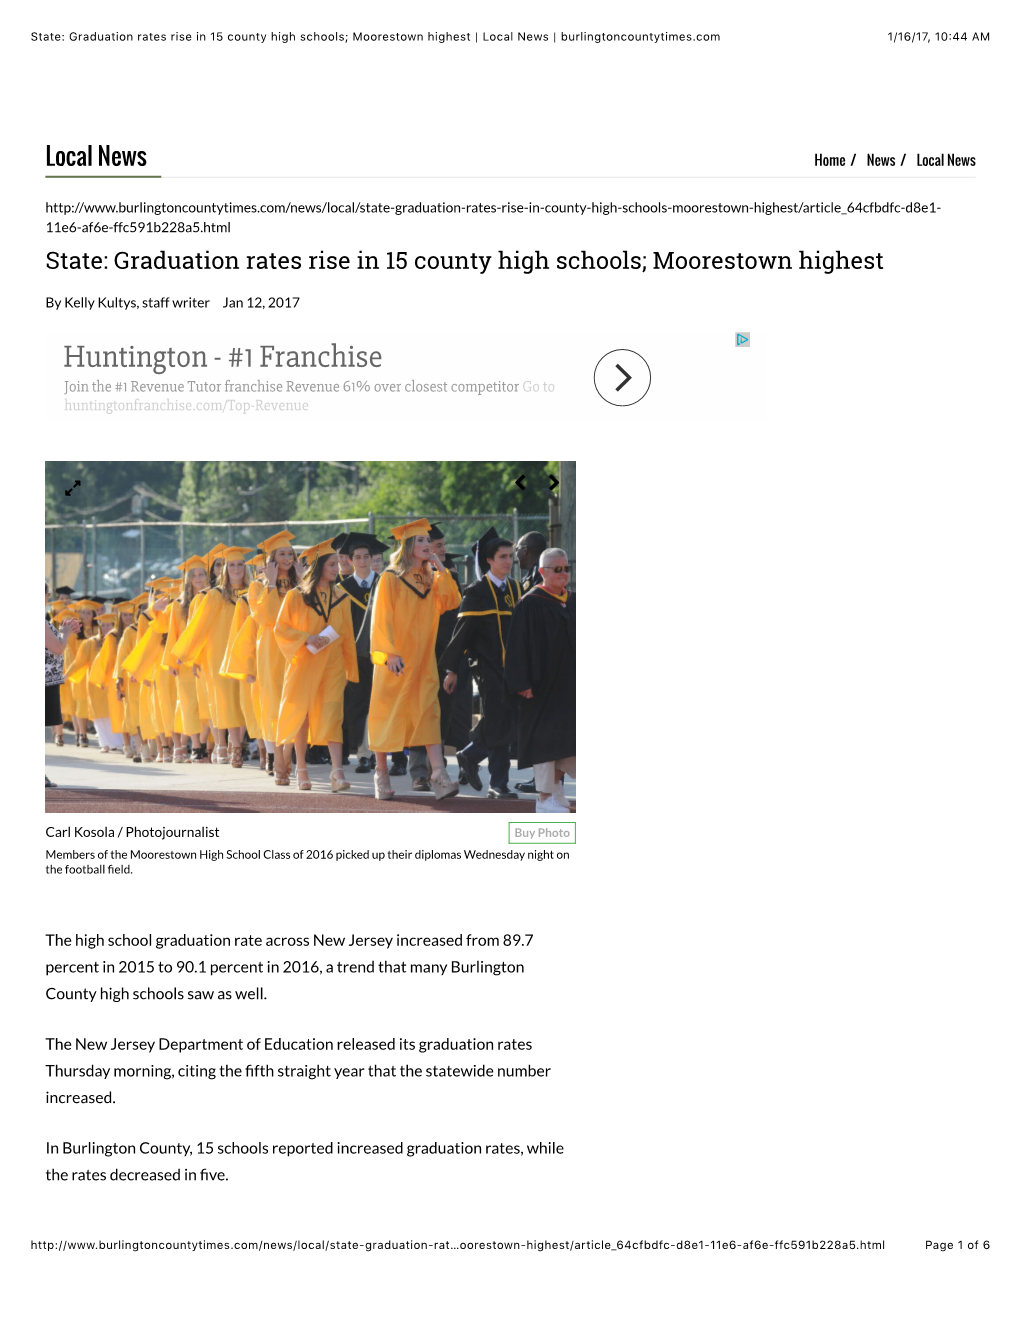 Graduation Rates Rise in 15 County High Schools; Moorestown Highest | Local News | Burlingtoncountytimes.Com 1/16/17, 10:44 AM